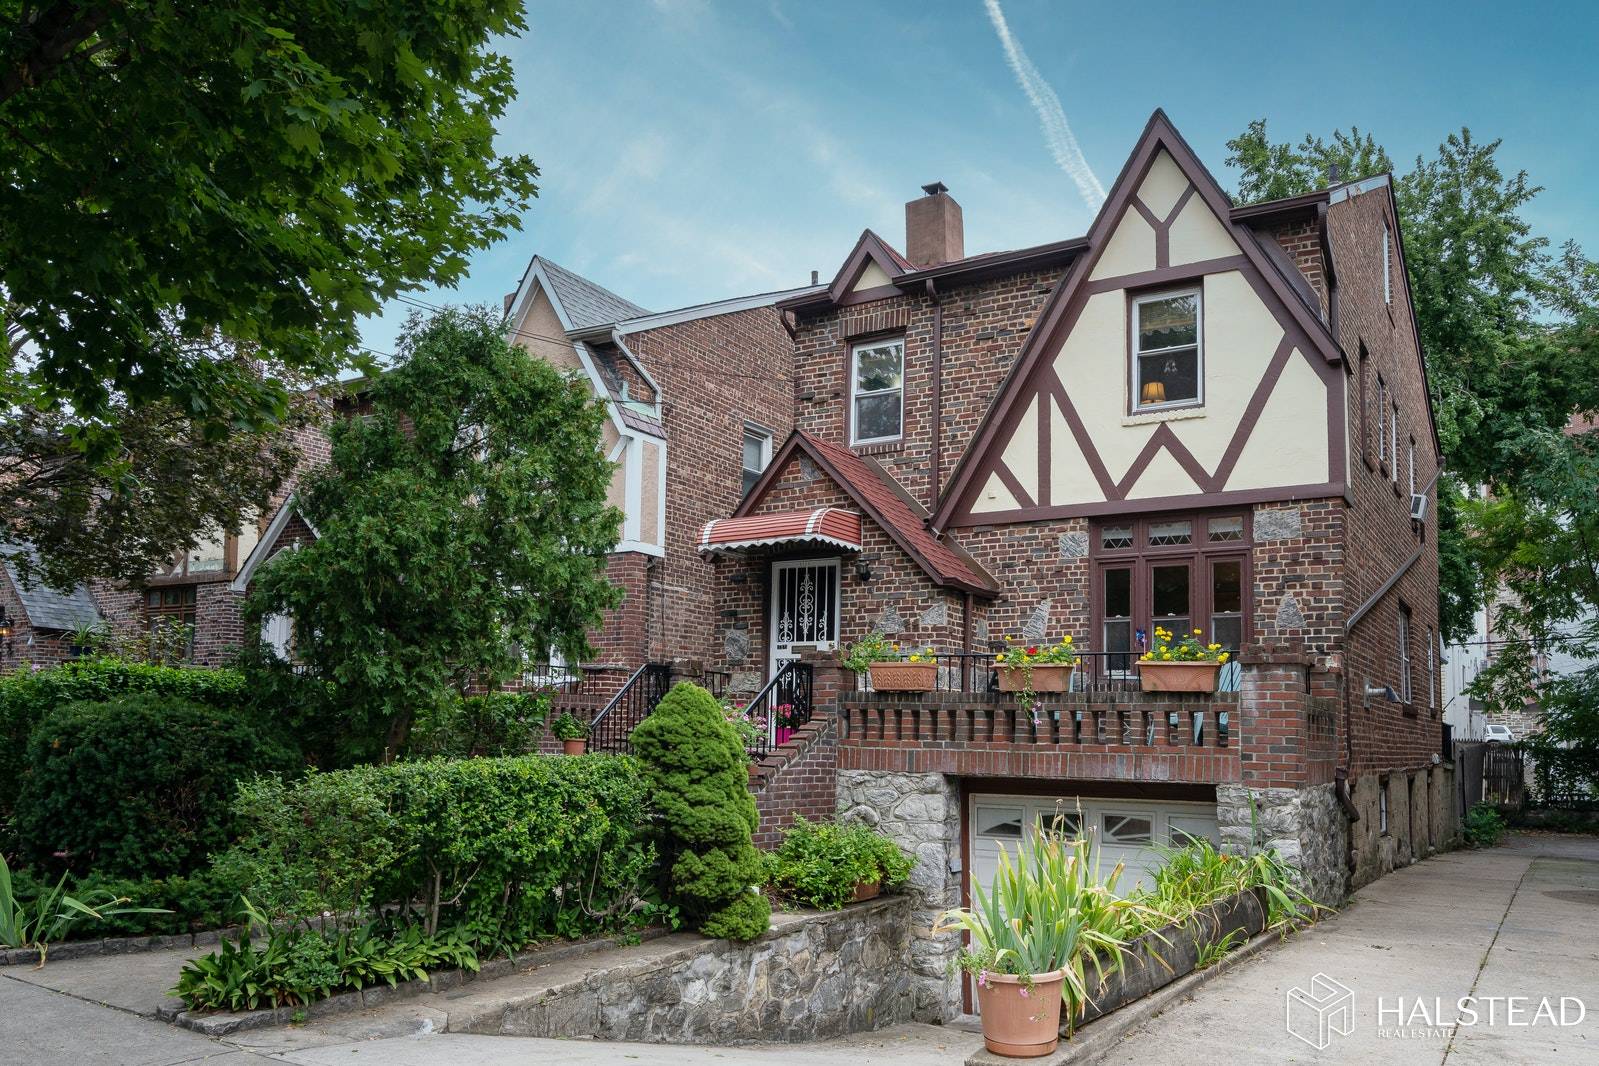 Welcome to Kingsbridge ! A detached brick and stucco tudor single family with hand hewn timber detail with a stone front porch over the garage, overlooking the charming garden and ...